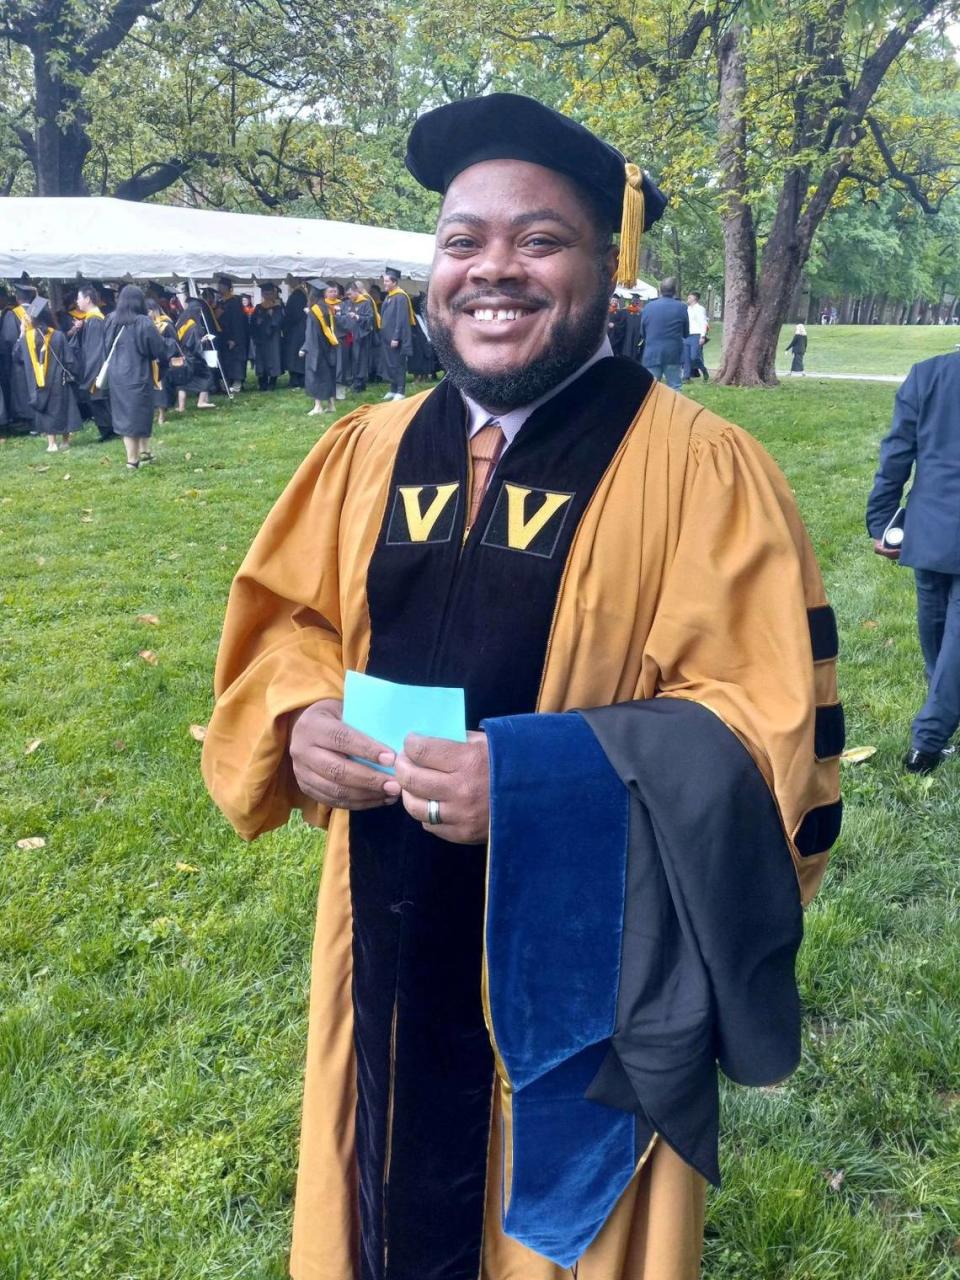 John Hood, a 2006 graduate of Carver High School in Columbus, earned a doctorate in astrophysics from Vanderbilt University in 2022 after volunteering and working at the Columbus State University Coca-Cola Space Science Center.